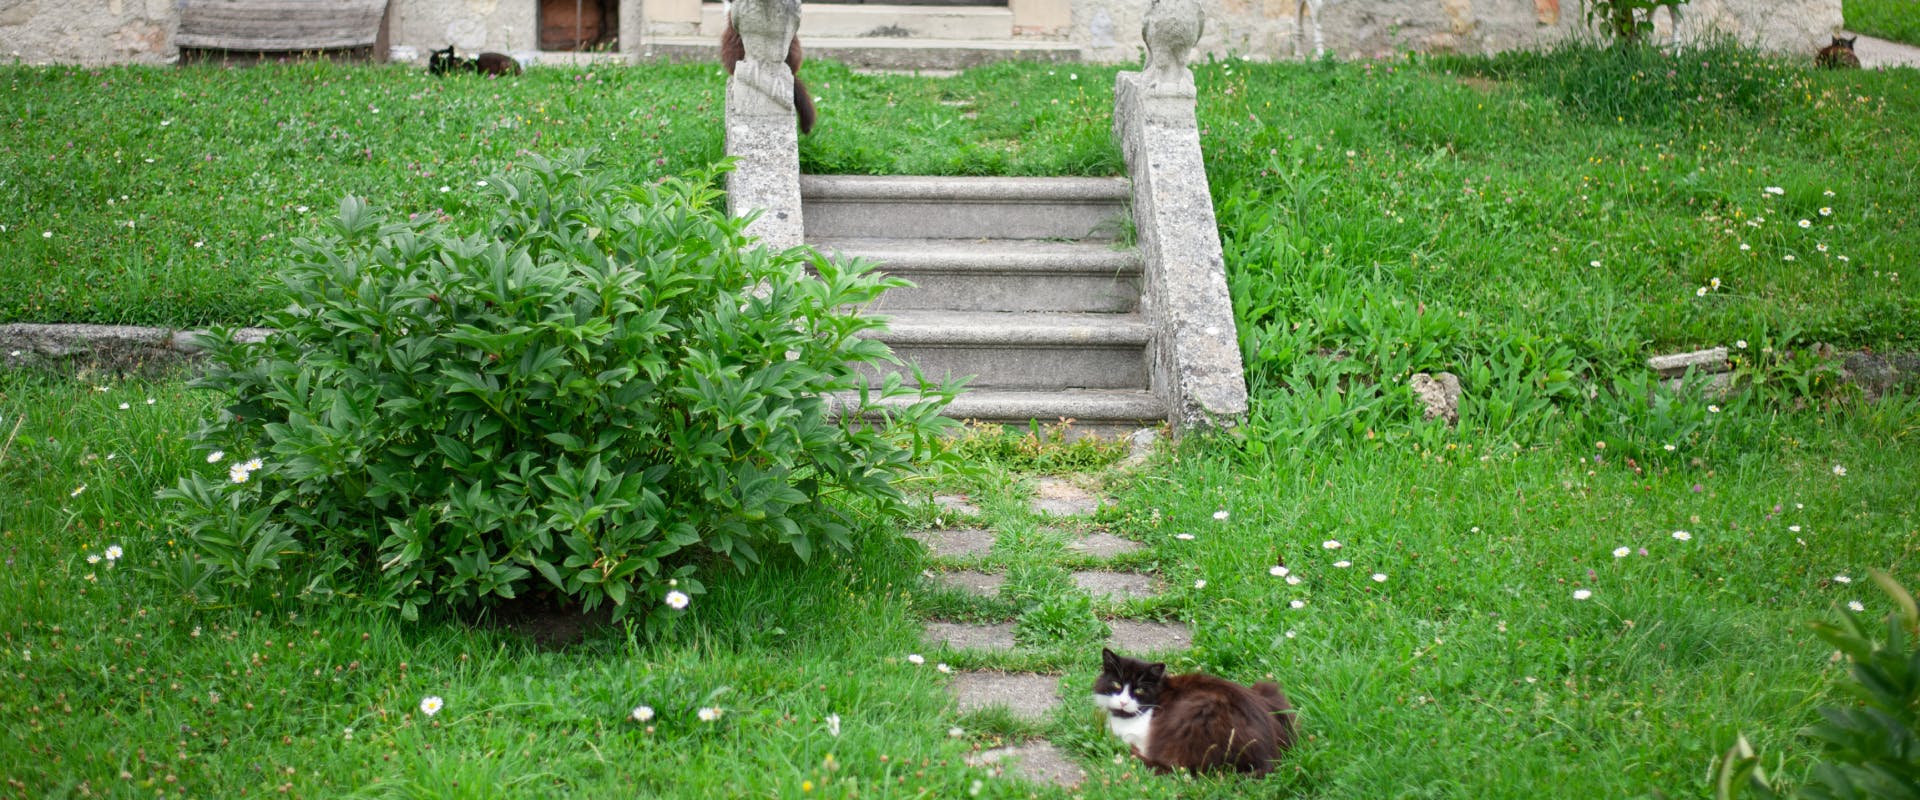 Some cats in the grounds of a historic property.